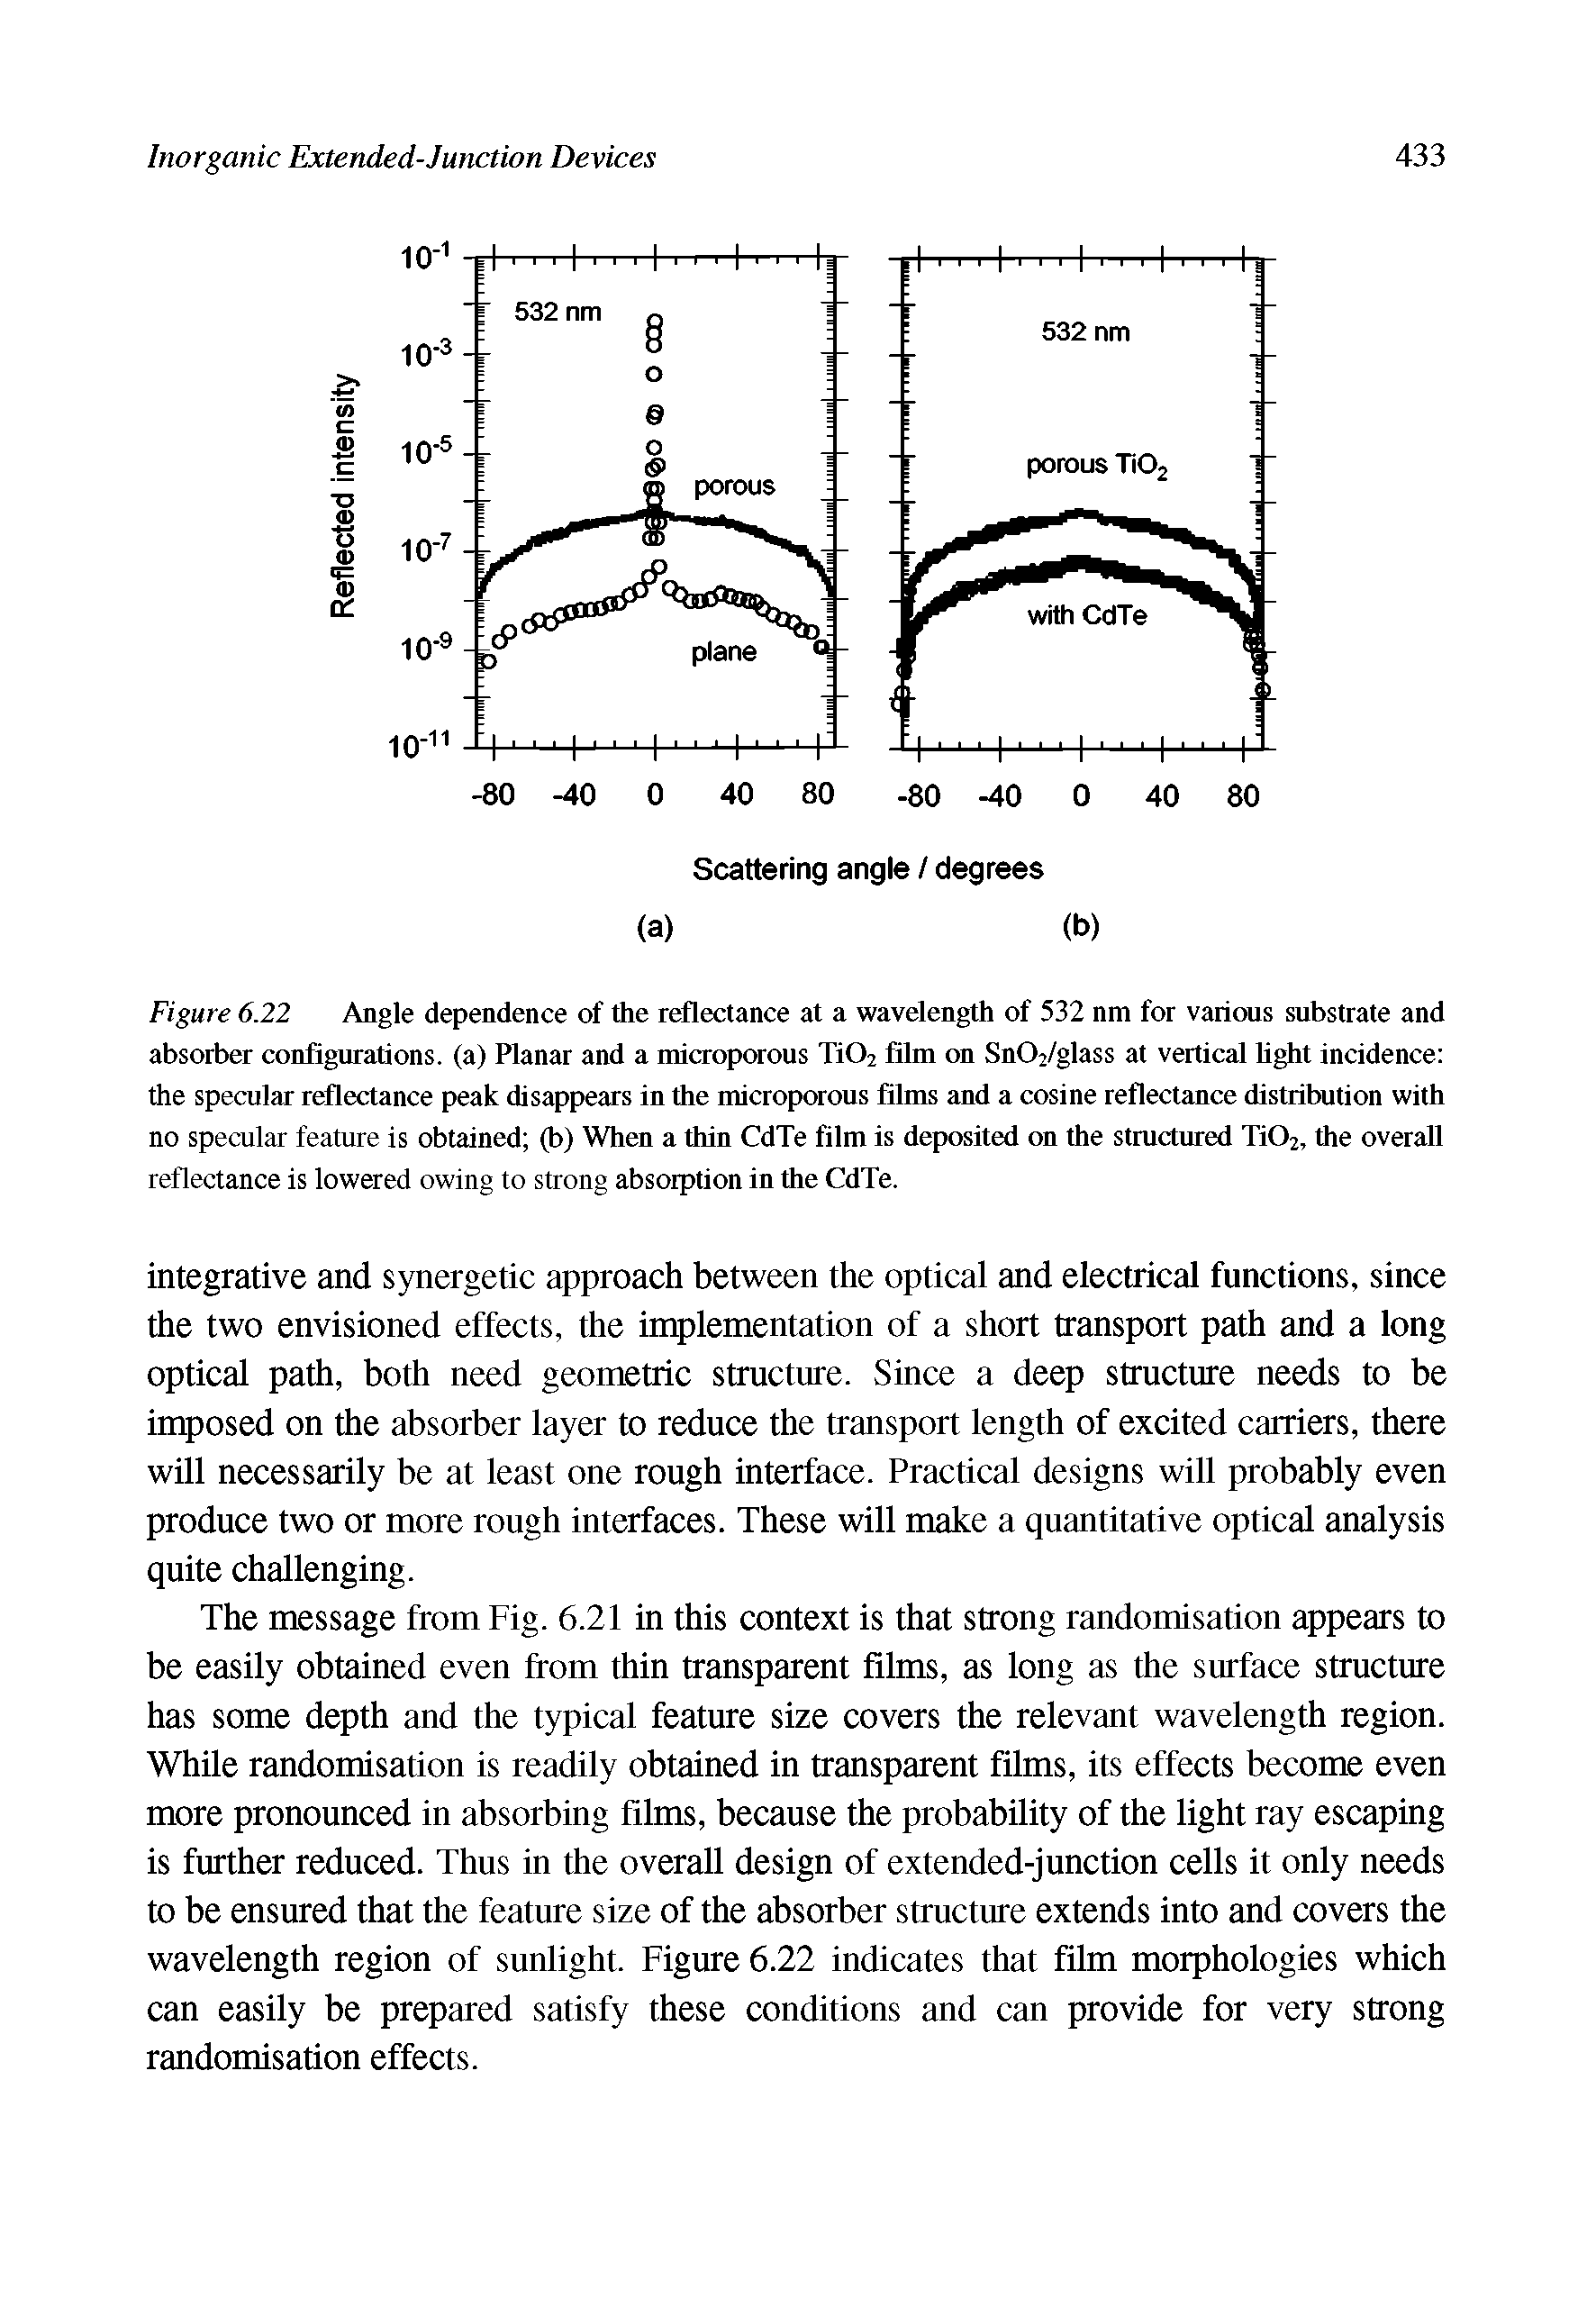 Figure 6.22 Angle dependence of the reflectance at a wavelength of 532 nm for various substrate and absorber configurations, (a) Planar and a microporous Xi02 film on SnOi/glass at vertical hght incidence the specular reflectance peak disappears in the microporous films and a cosine reflectance distribution with no specular feature is obtained (b) When a thin CdTe film is deposited on the structured Xi02, the overall...